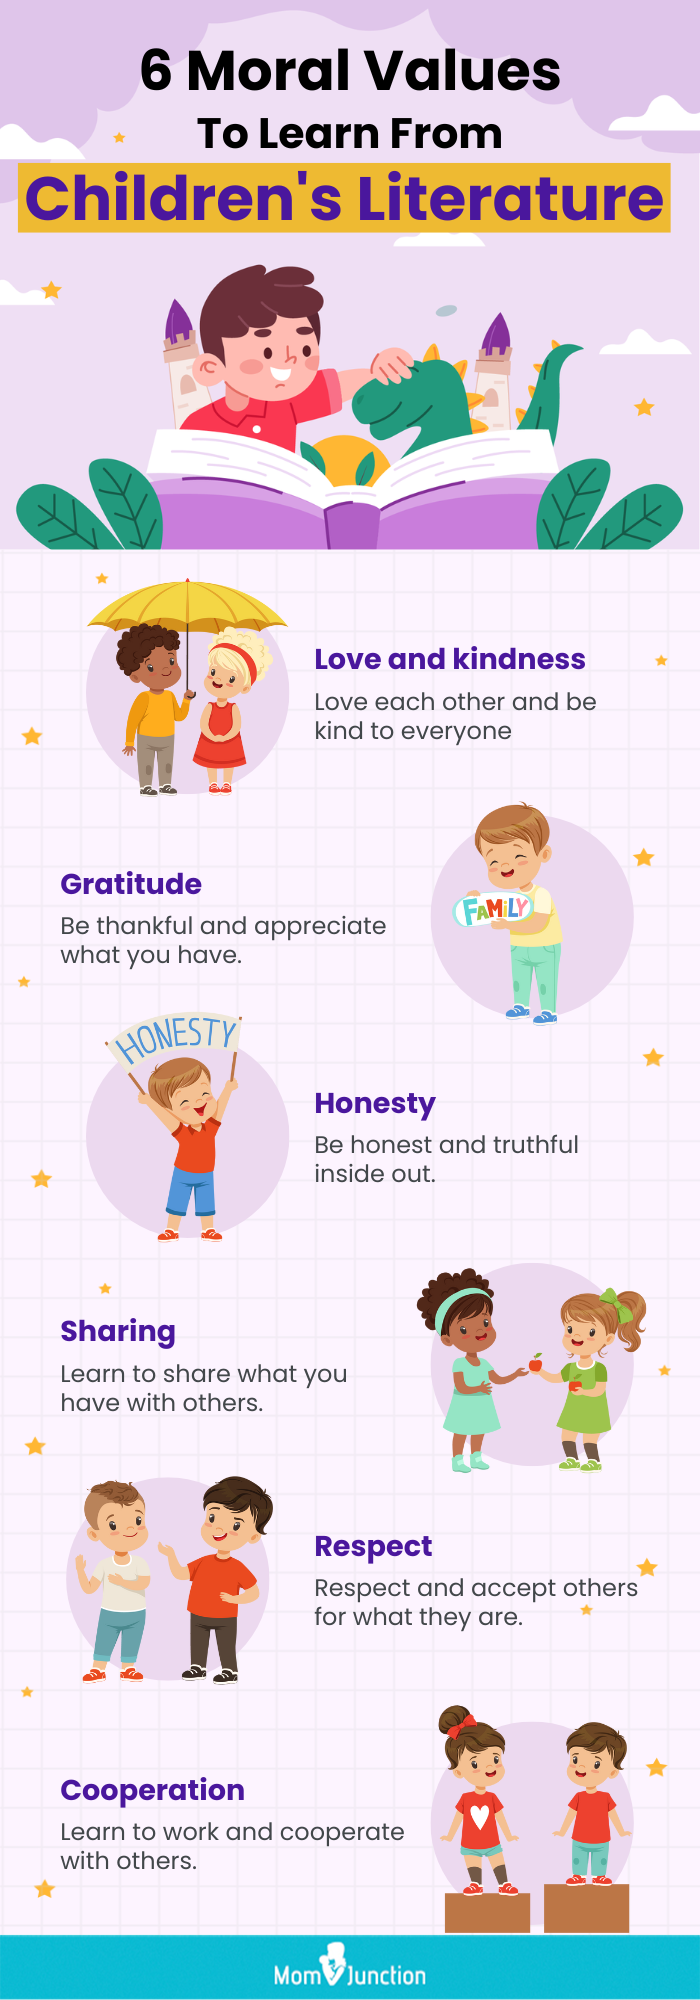 6 moral values to learn from childrens literature (infographic)